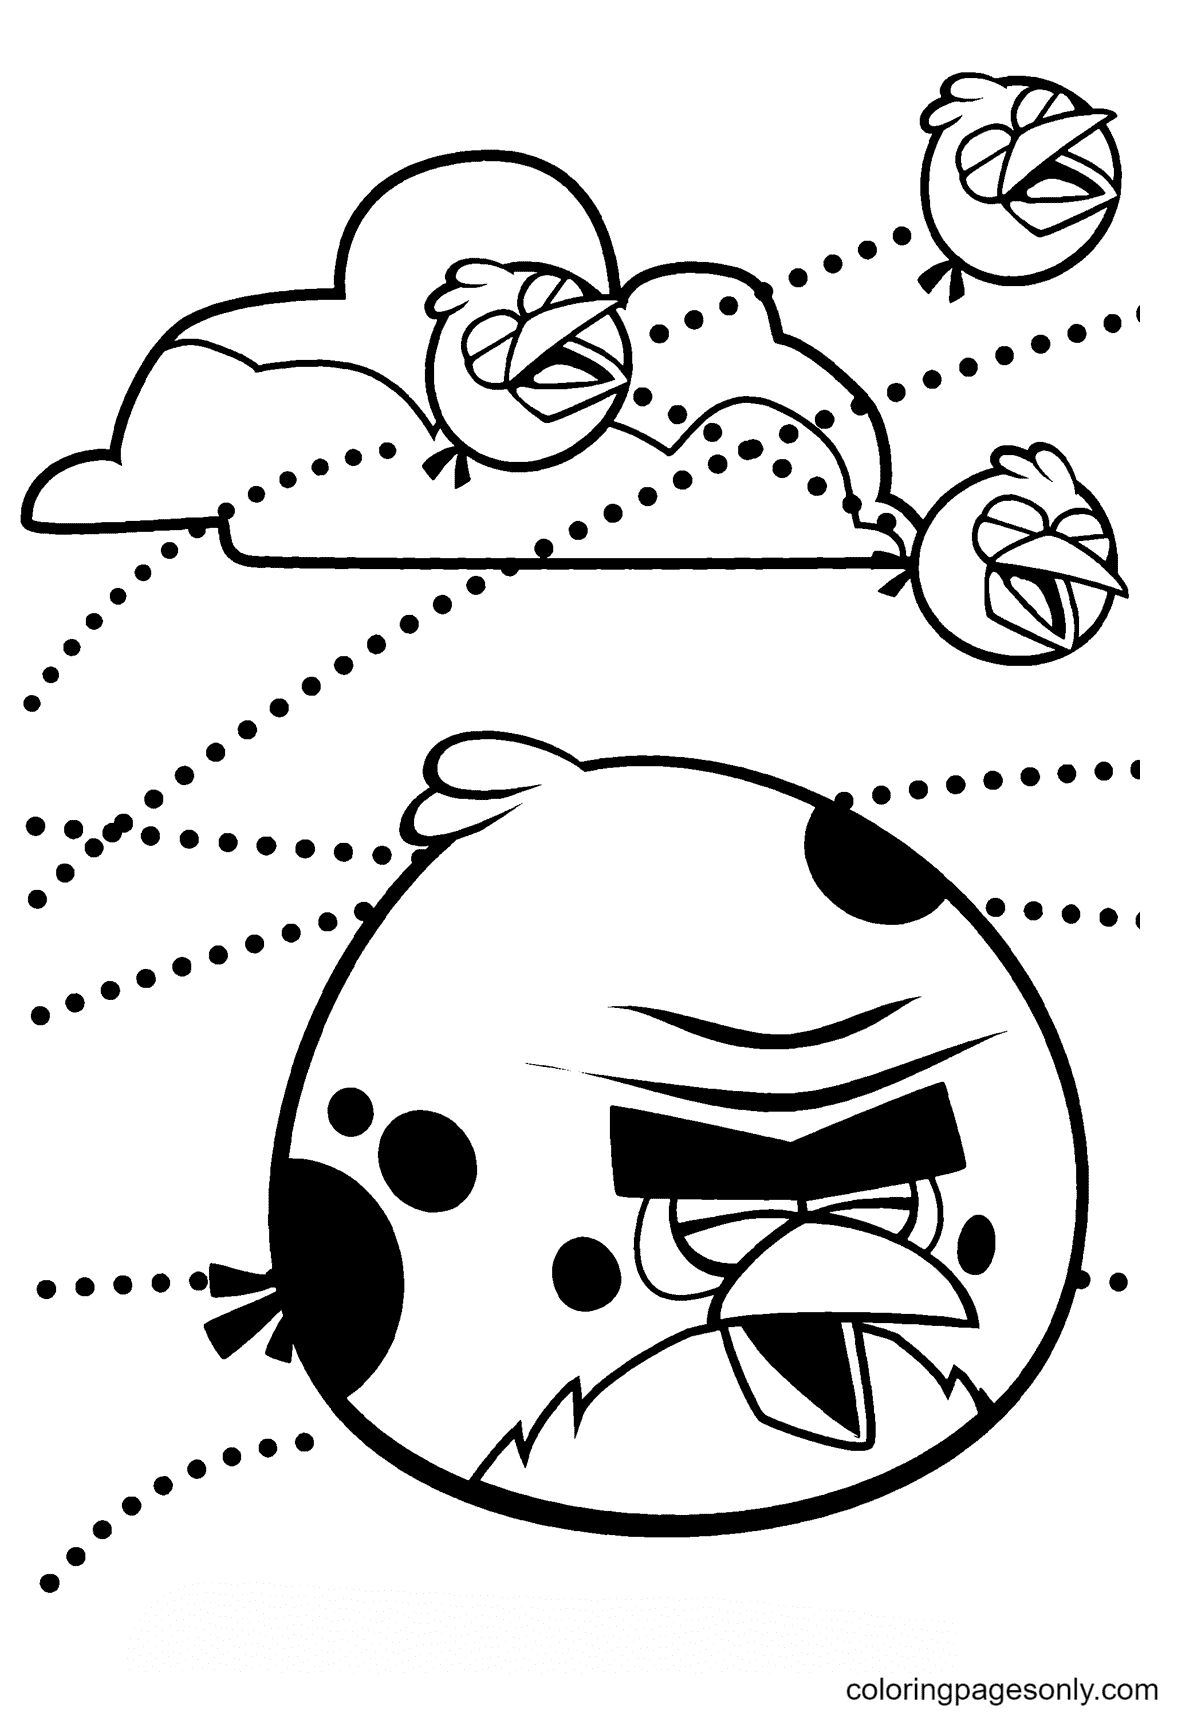 Terence and the Blues Birds Coloring Page